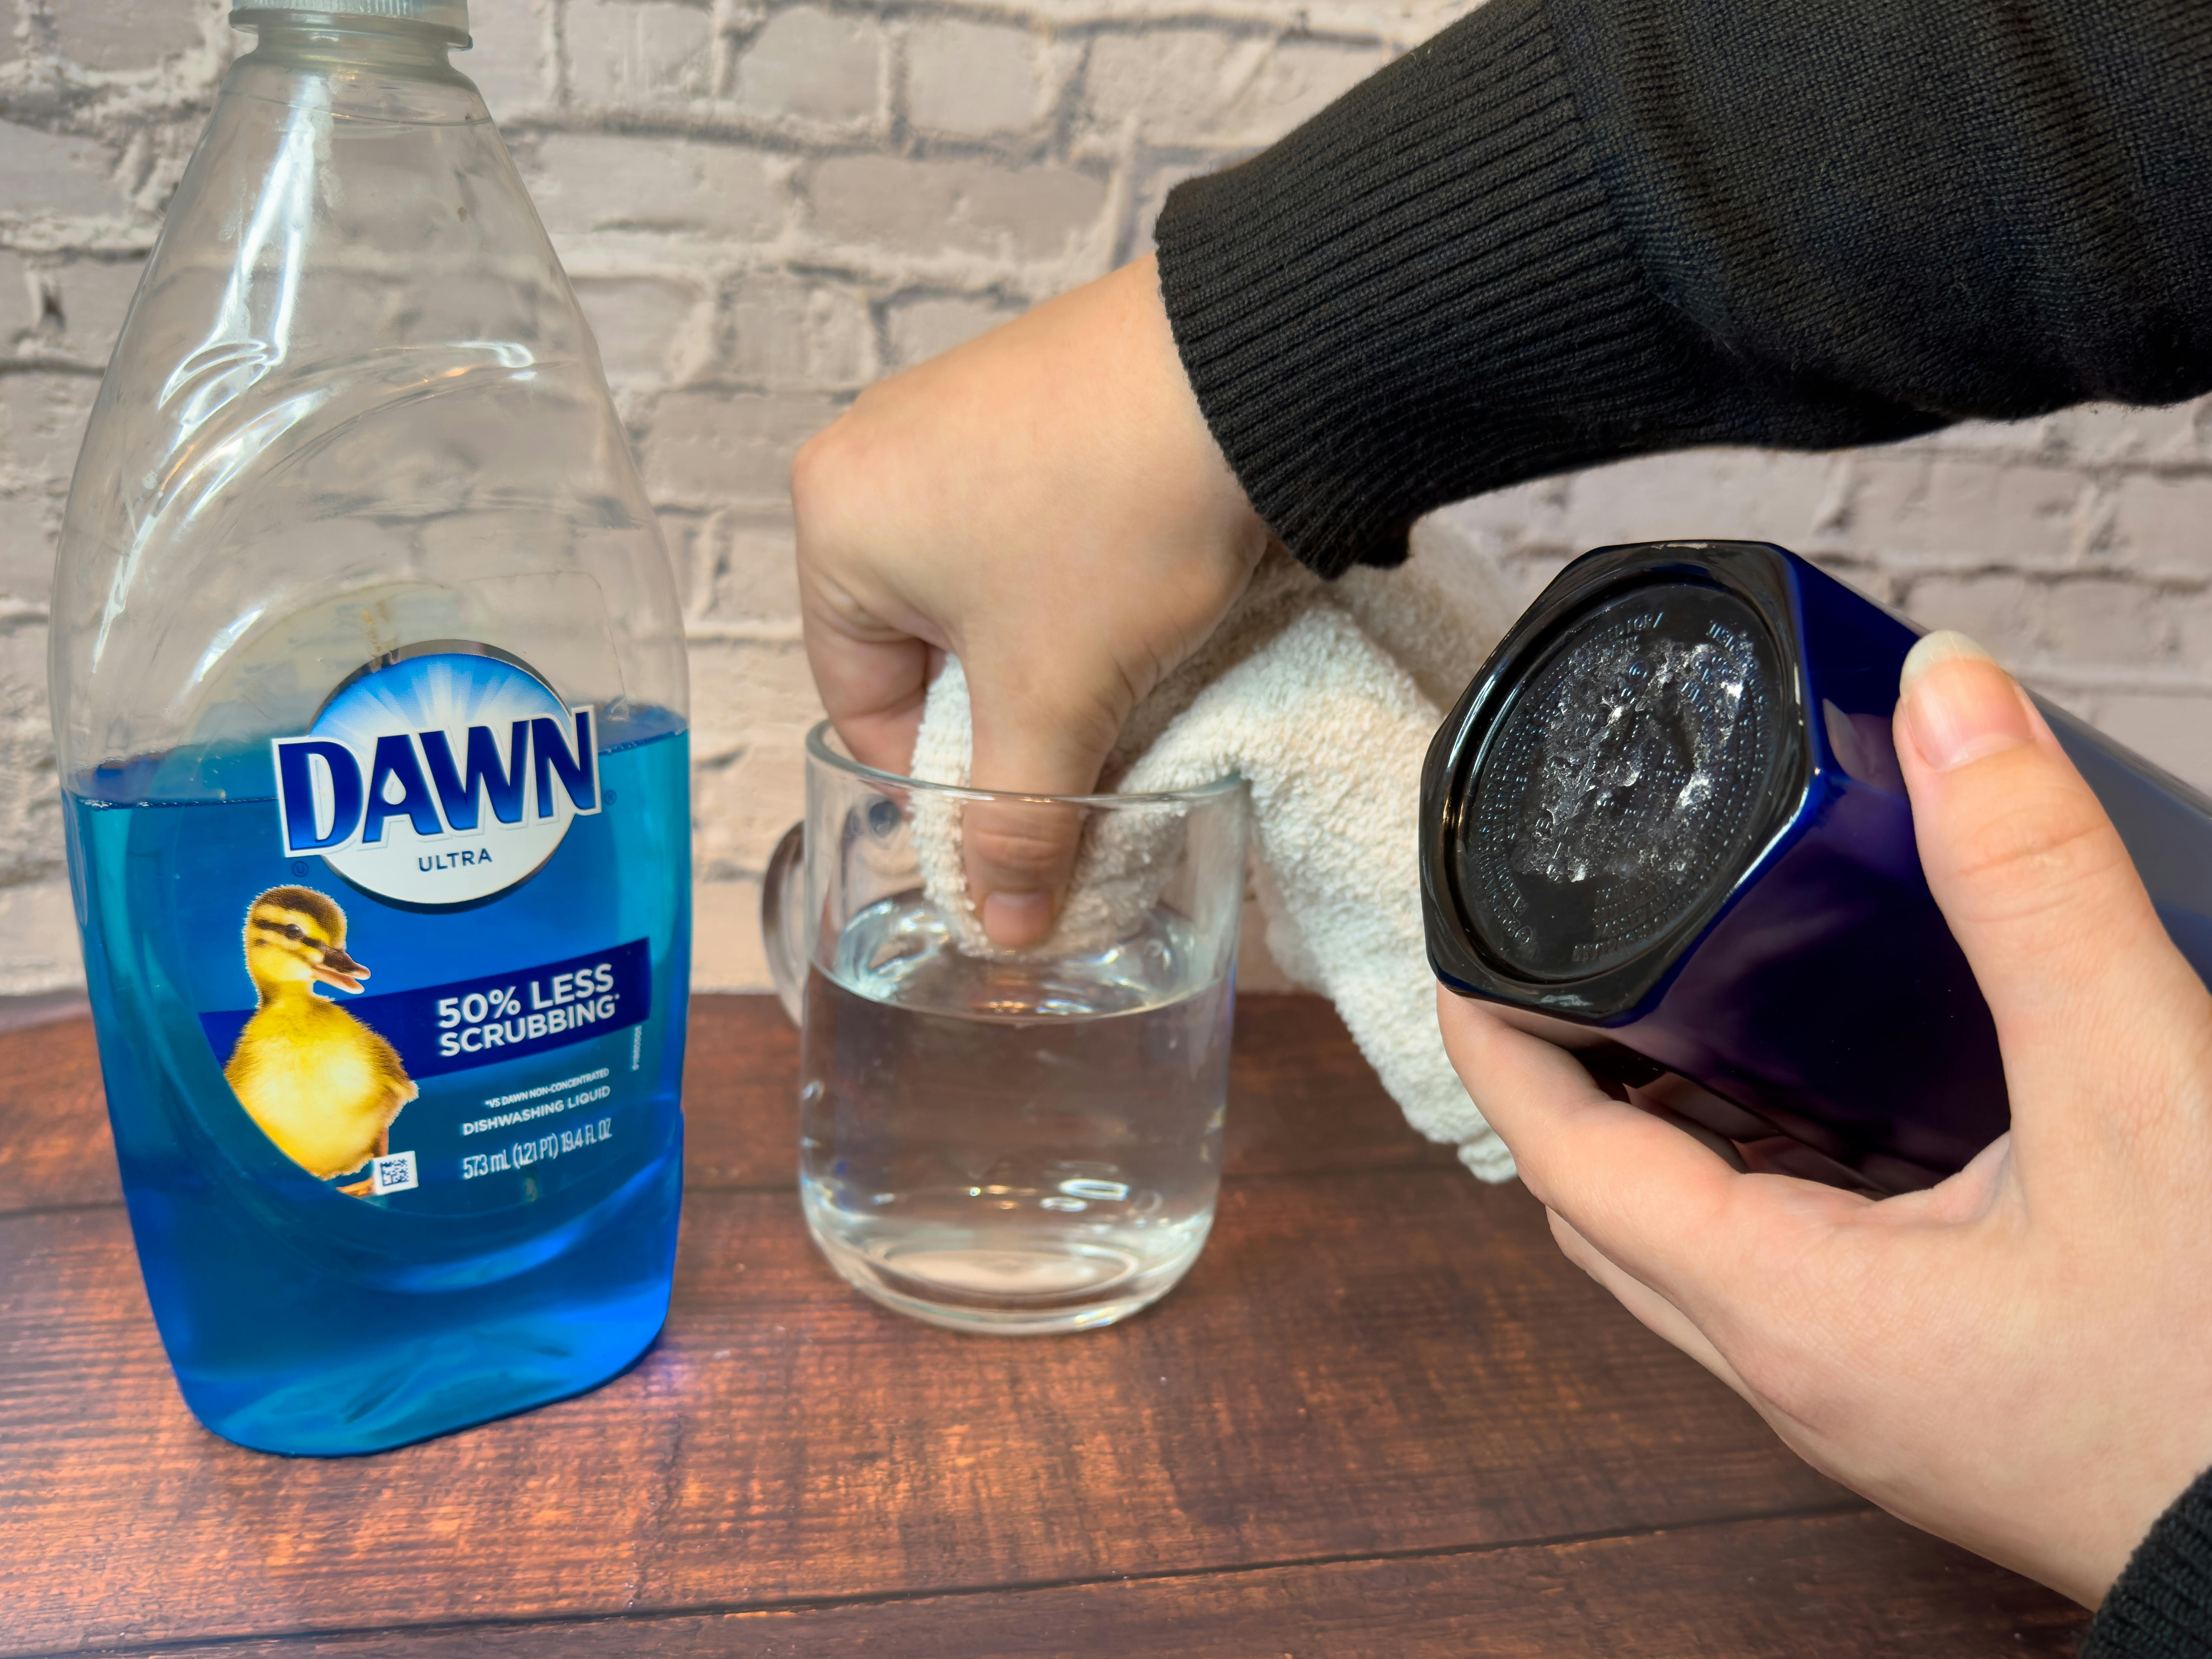 Someone dipping a rag into a glass of warm water next to a bottle of Dawn dish soap and holding a Starbucks cup showing the sticker residue left on the bottom